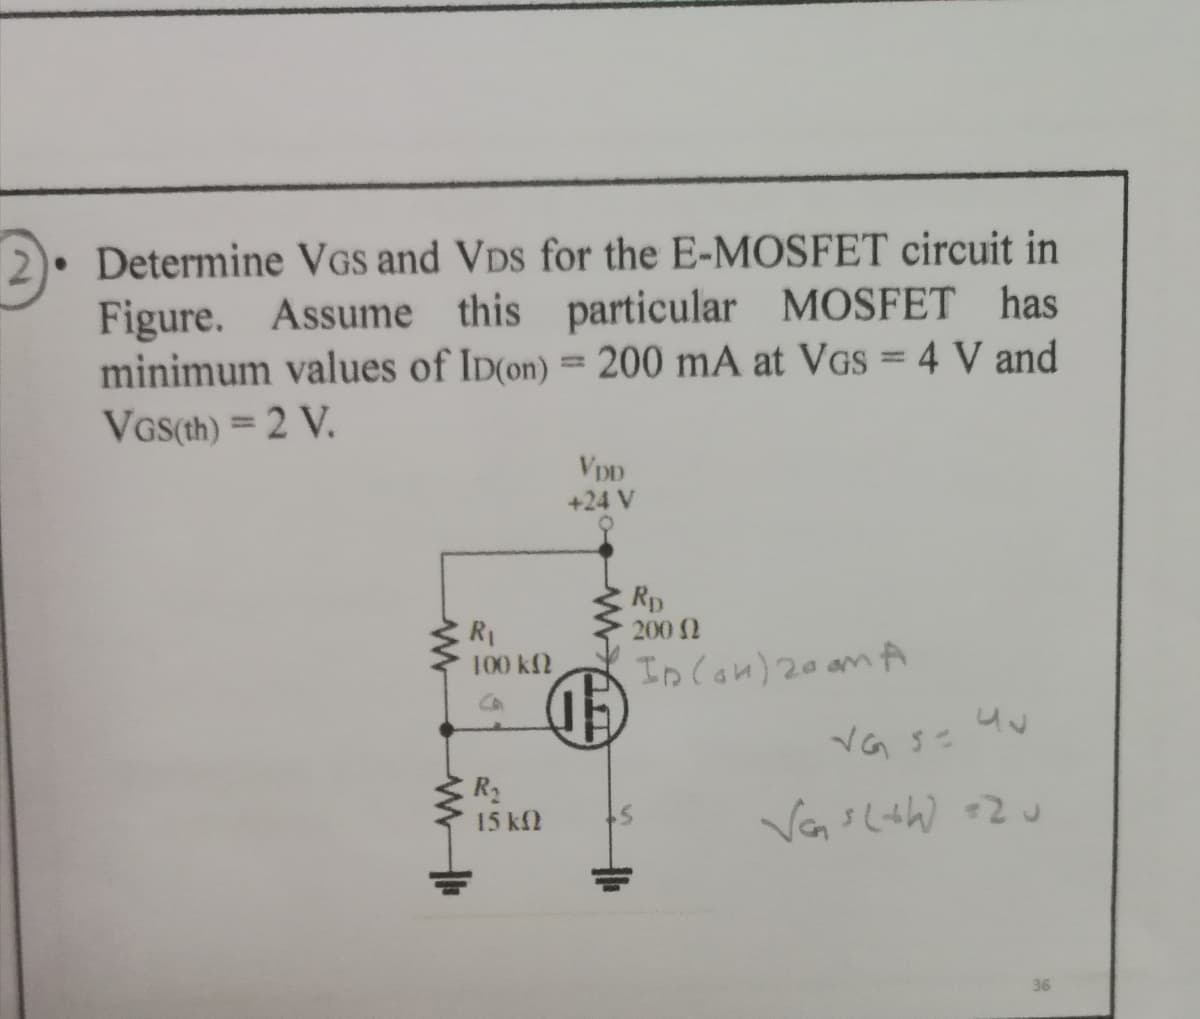 2). Determine VGs and VDs for the E-MOSFET circuit in
Figure. Assume this particular MOSFET has
minimum values of ID(on) = 200 mA at VGs = 4 V and
VGS(th) = 2 V.
+24 V
Rp
200 2
R1
100 kf2
In Con) 20 am A
R2
15 kf2
